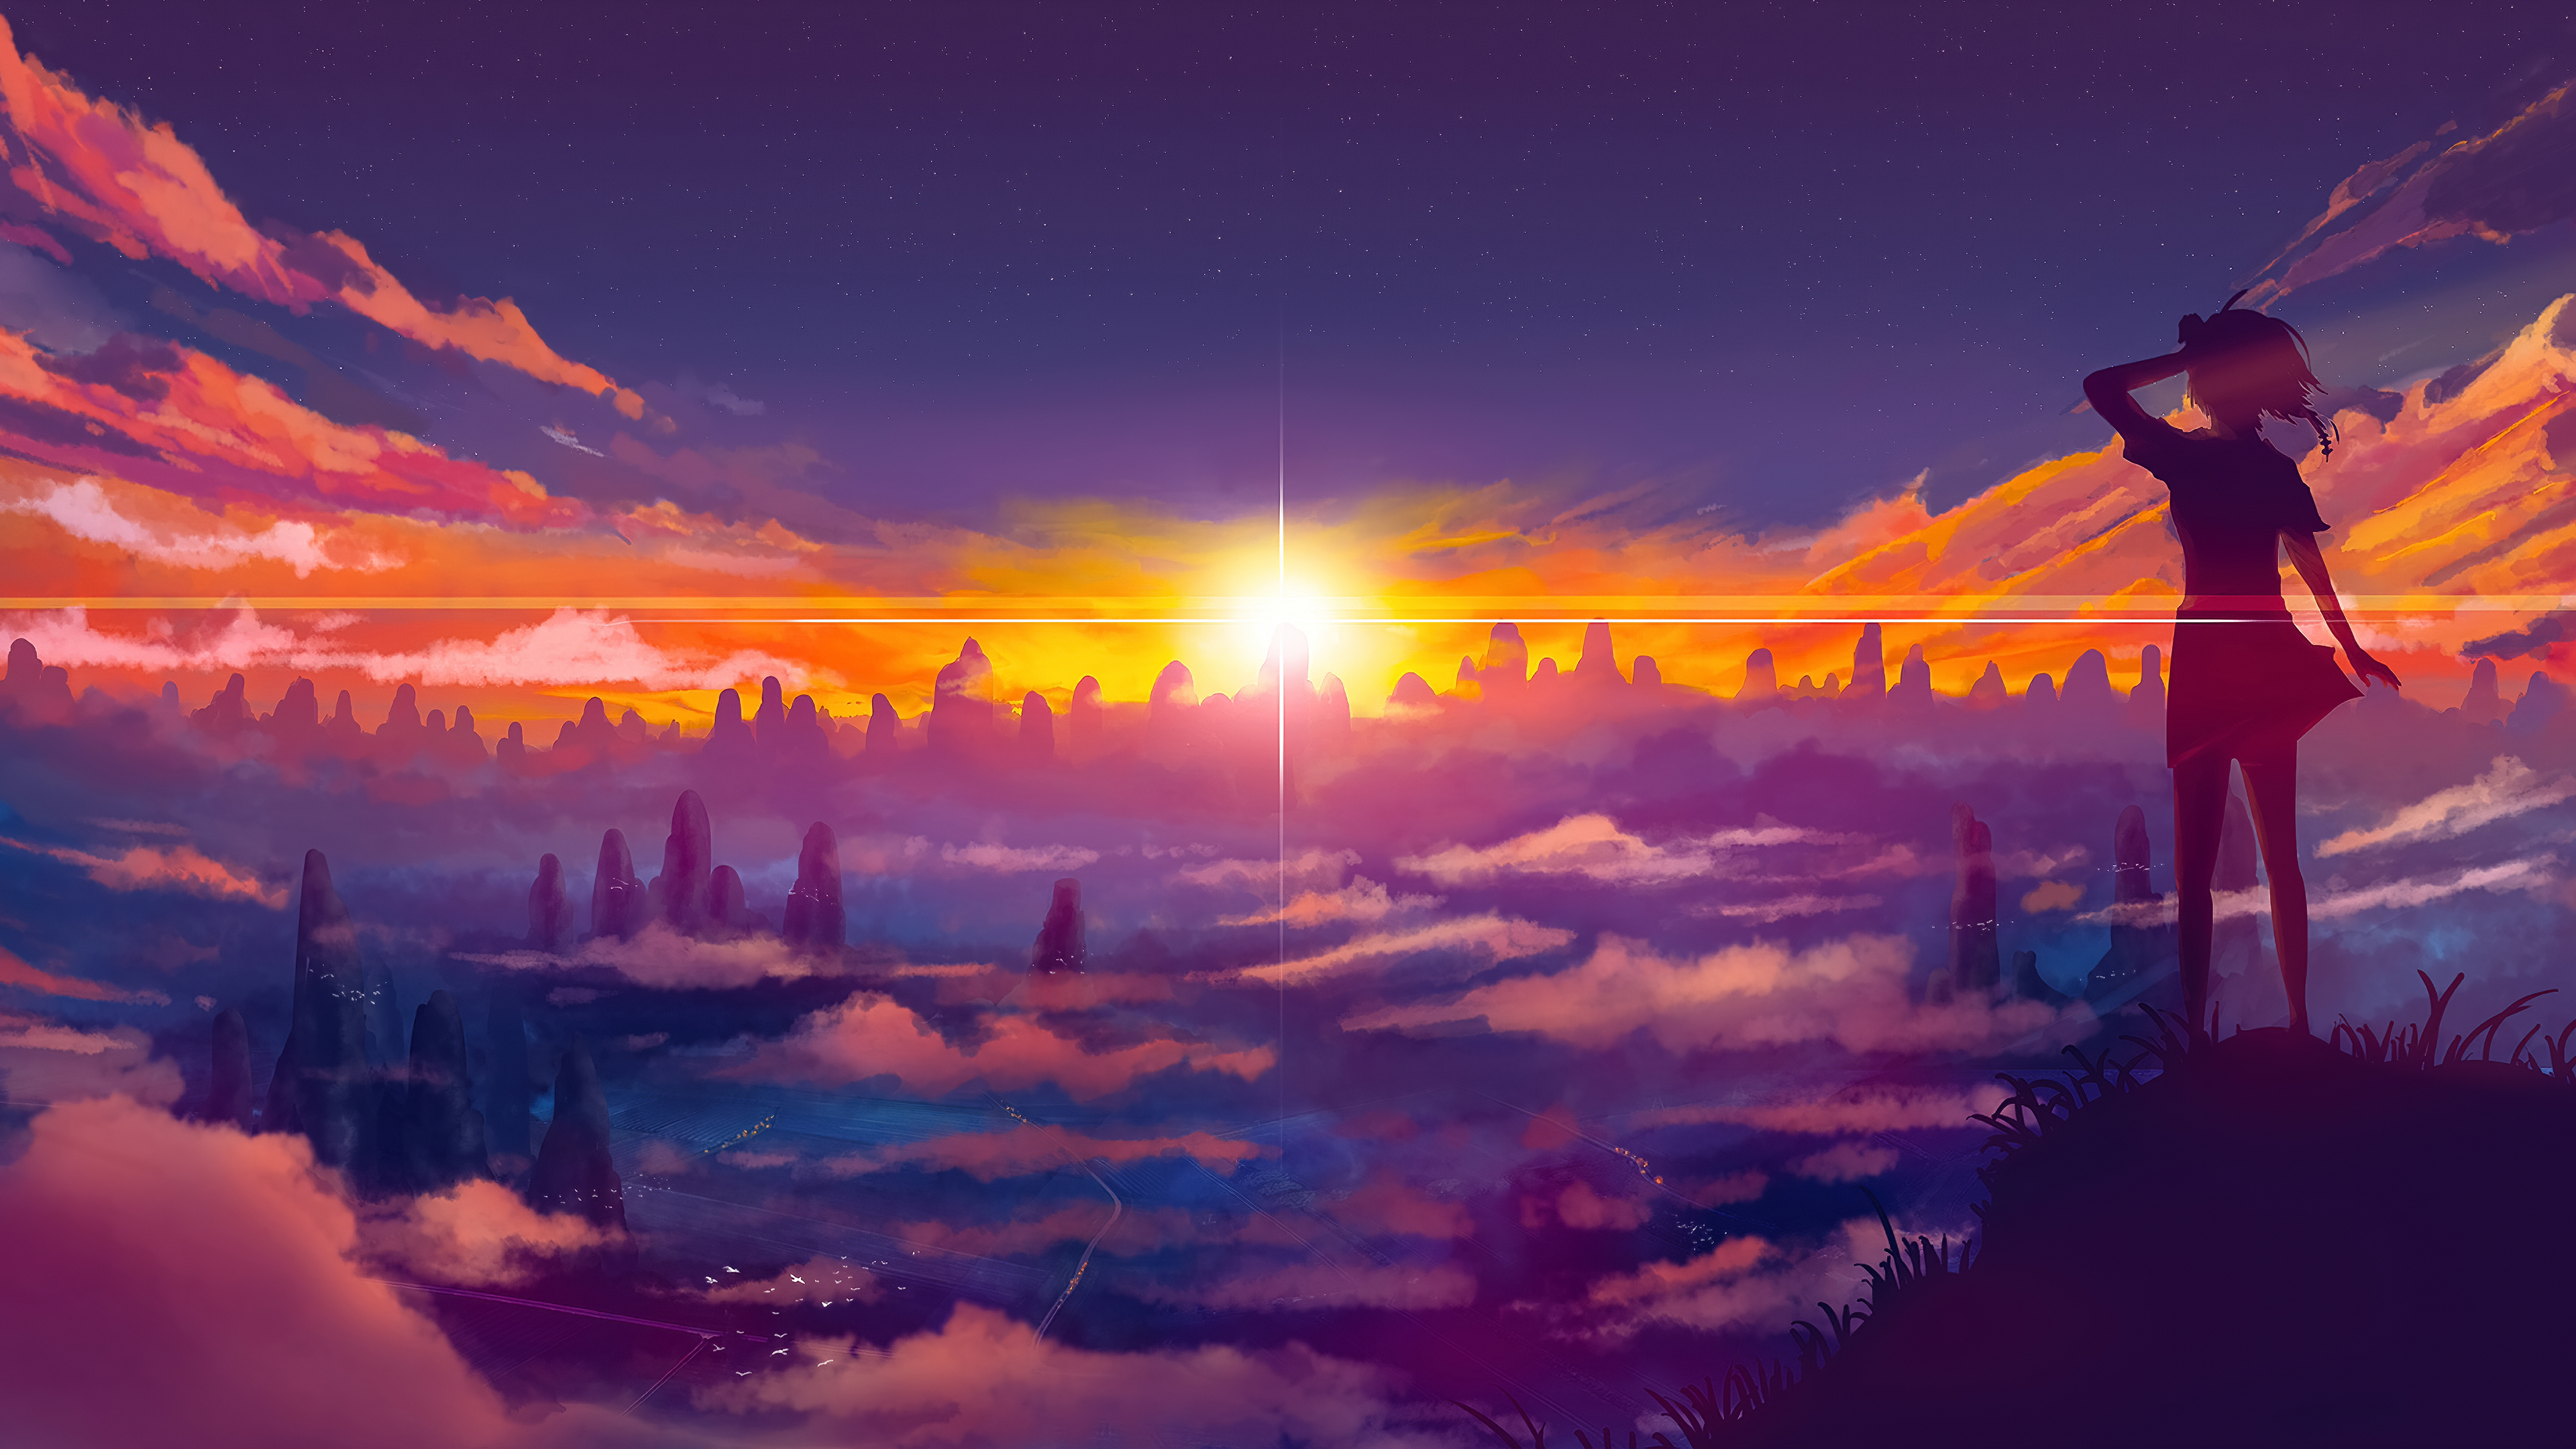 Anime Top Of The World - 3840x2160 Wallpaper 